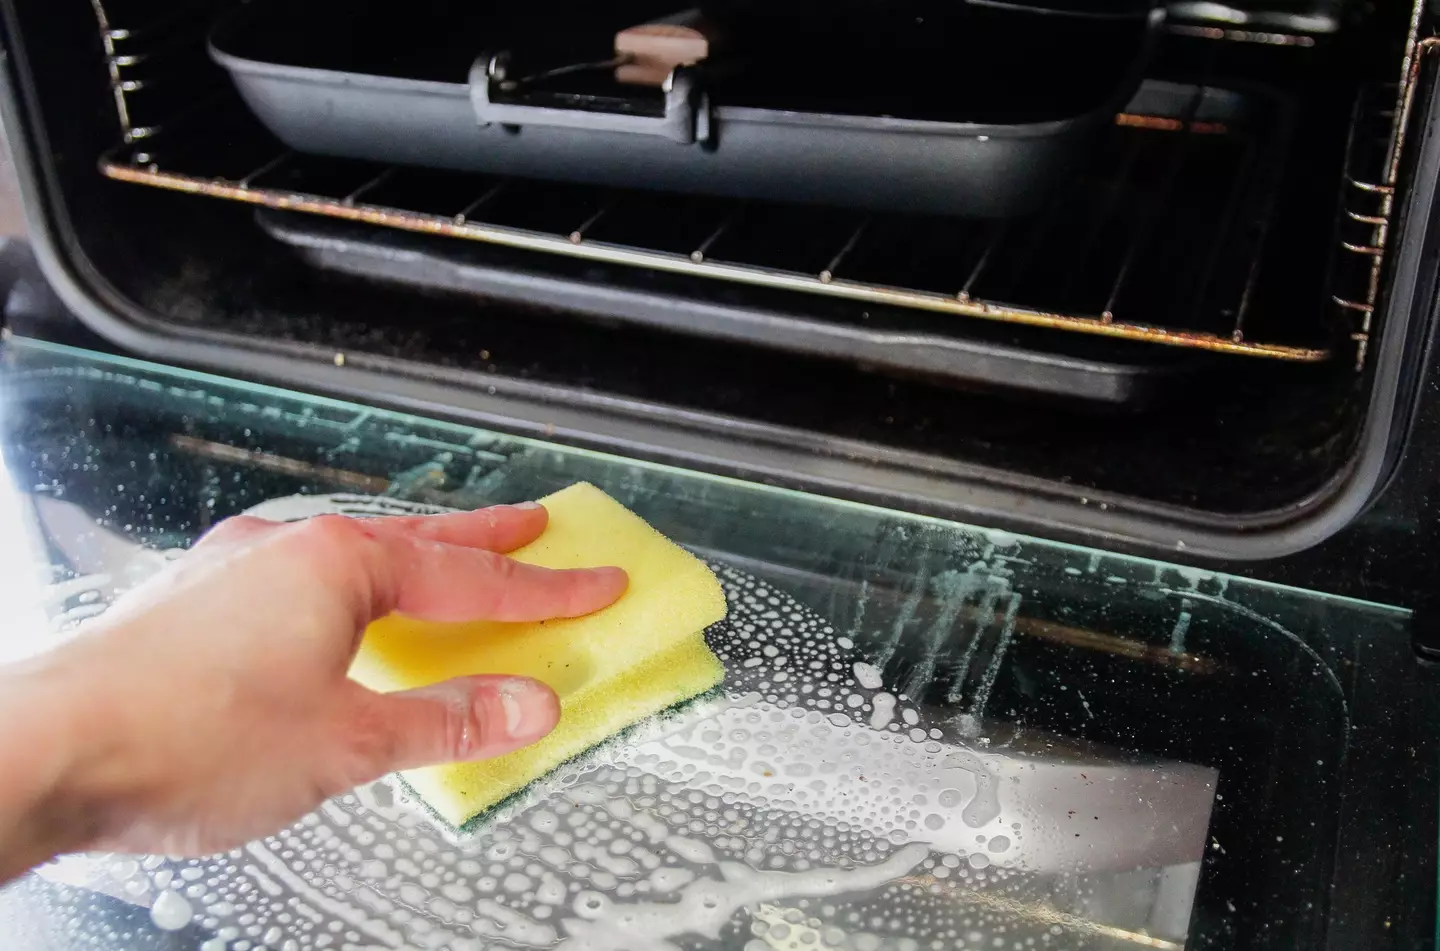 Cleaning the oven is arguably the worst job. (Kinga Krzeminska/Getty Stock Image)